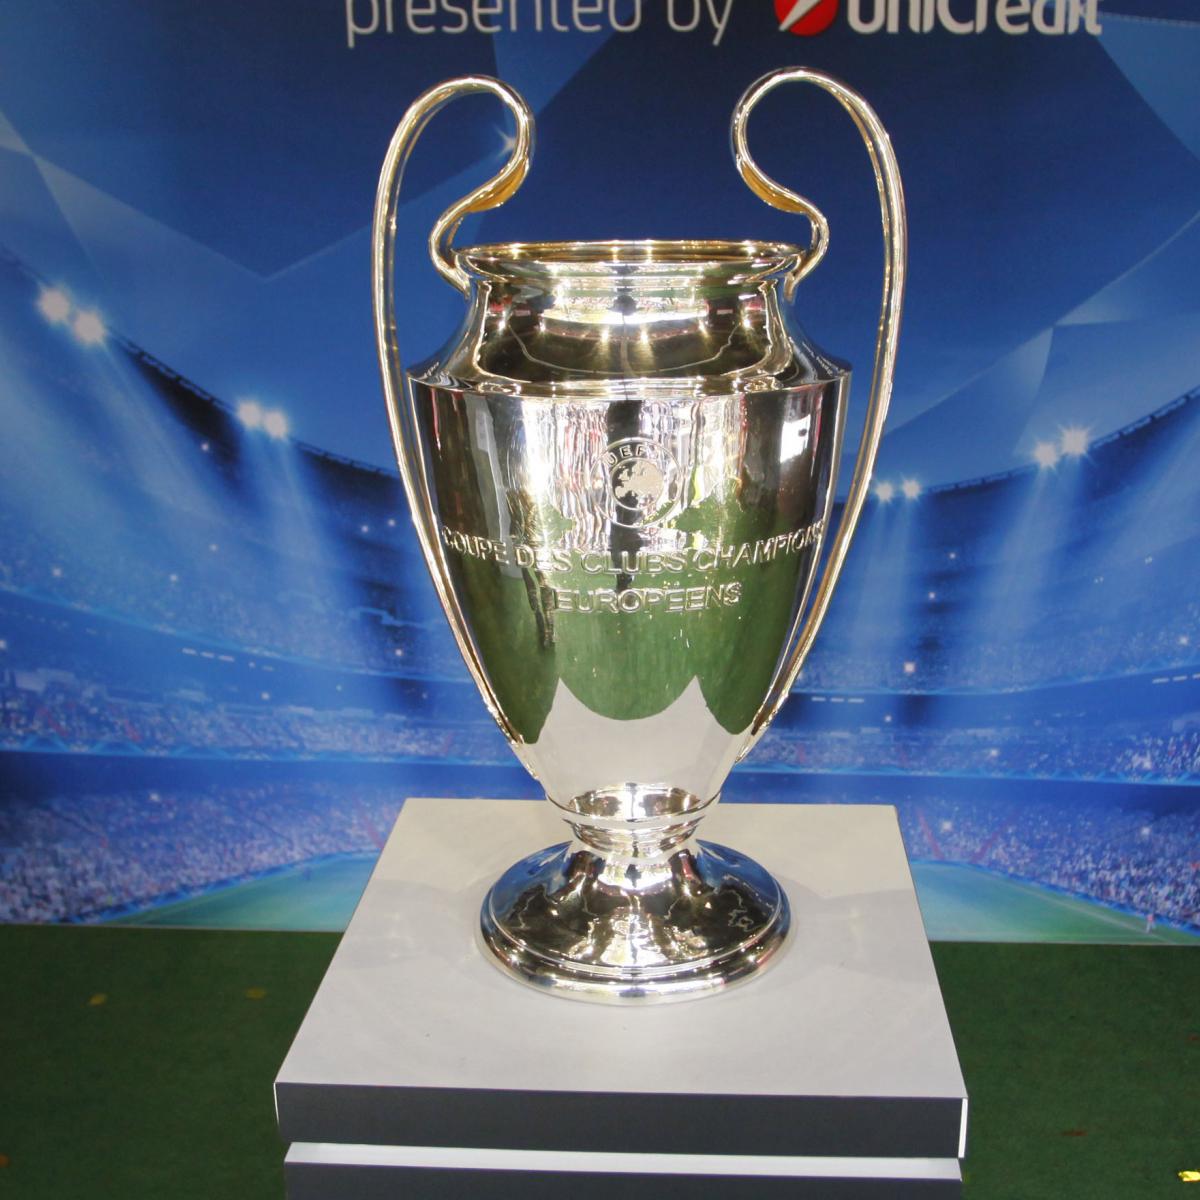 UEFA Champions League 2013: Teams That Have Qualified and Permutations ...